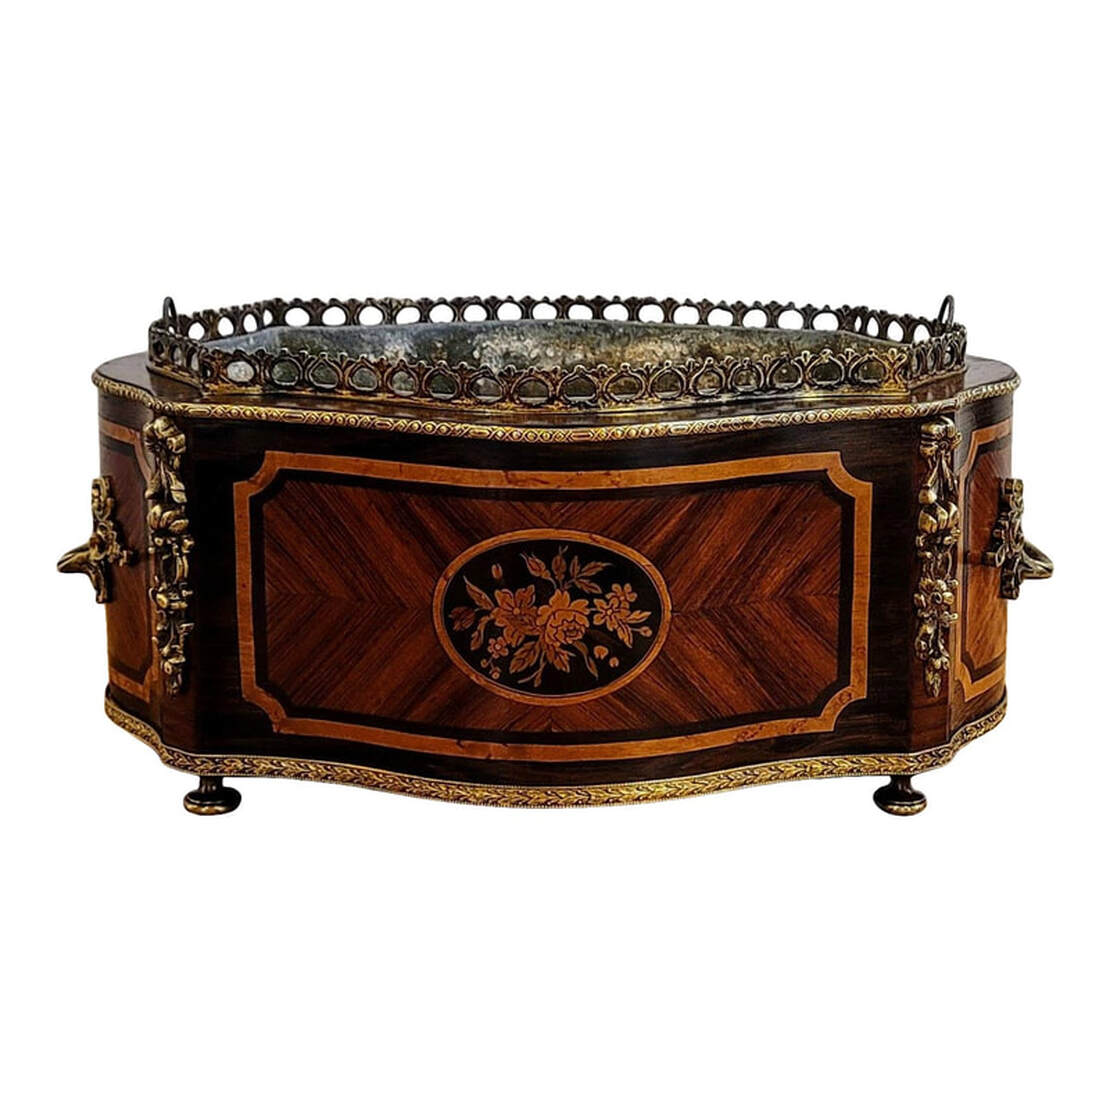 Antique jardiniere for tulips and orchids from the French period of Napoleon III, 1850-1870.  The rosewood bombe shaped cachepot is decorated with veneer work in amboyna, yew, satinwood, kingwood, ebony and mahogany.  The front and back feature a floral marquetry cartouche surrounded by amboyna banding, chevroned veneer, and all framed with ebony and amboyna banding.  The sides are mounted with gilt bronze scrolled acanthus leaf handles over chevron veneer and framed with shaped banding in ebony and amboyna woods.  On the top is a gilt bronze gallery pierced with a peacock tail eye design.  The top and bottom edges are decorated with applied stamped decorative gilt bronze banding. The top banding is stamped with guilloche strapping. The bottom banding is stamped with a laurel leaf design.  The four corners are decorated with gilt bronze ormolu floral pendants.  The planter stands upon four turned gilt bronze knob feet.  The jardiniere insert is bombe-shaped zinc with a ring pull on either side that folds down inside the insert.